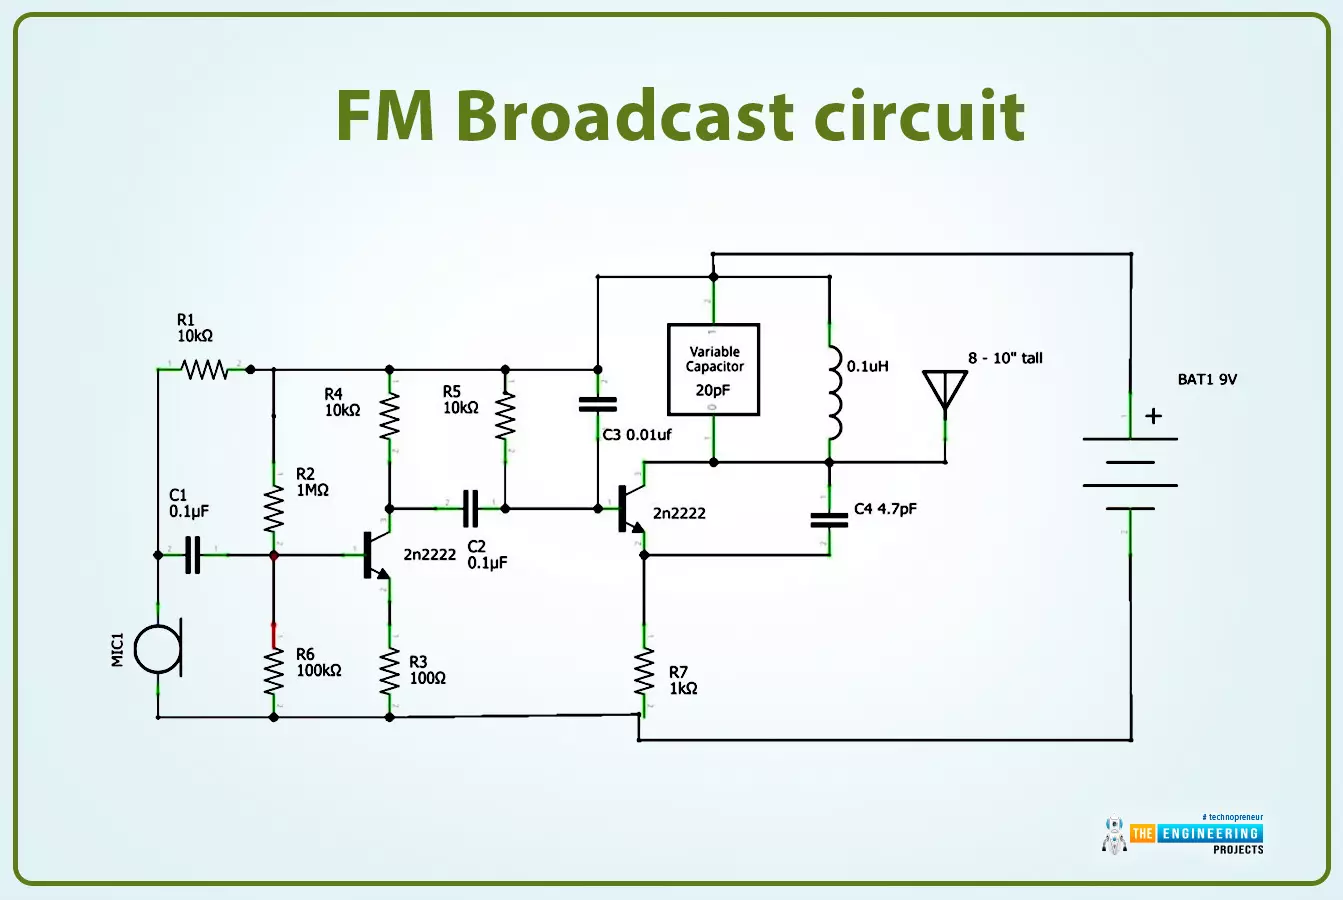 How to Build a Raspberry Pi FM Transmitter - The Engineering Projects